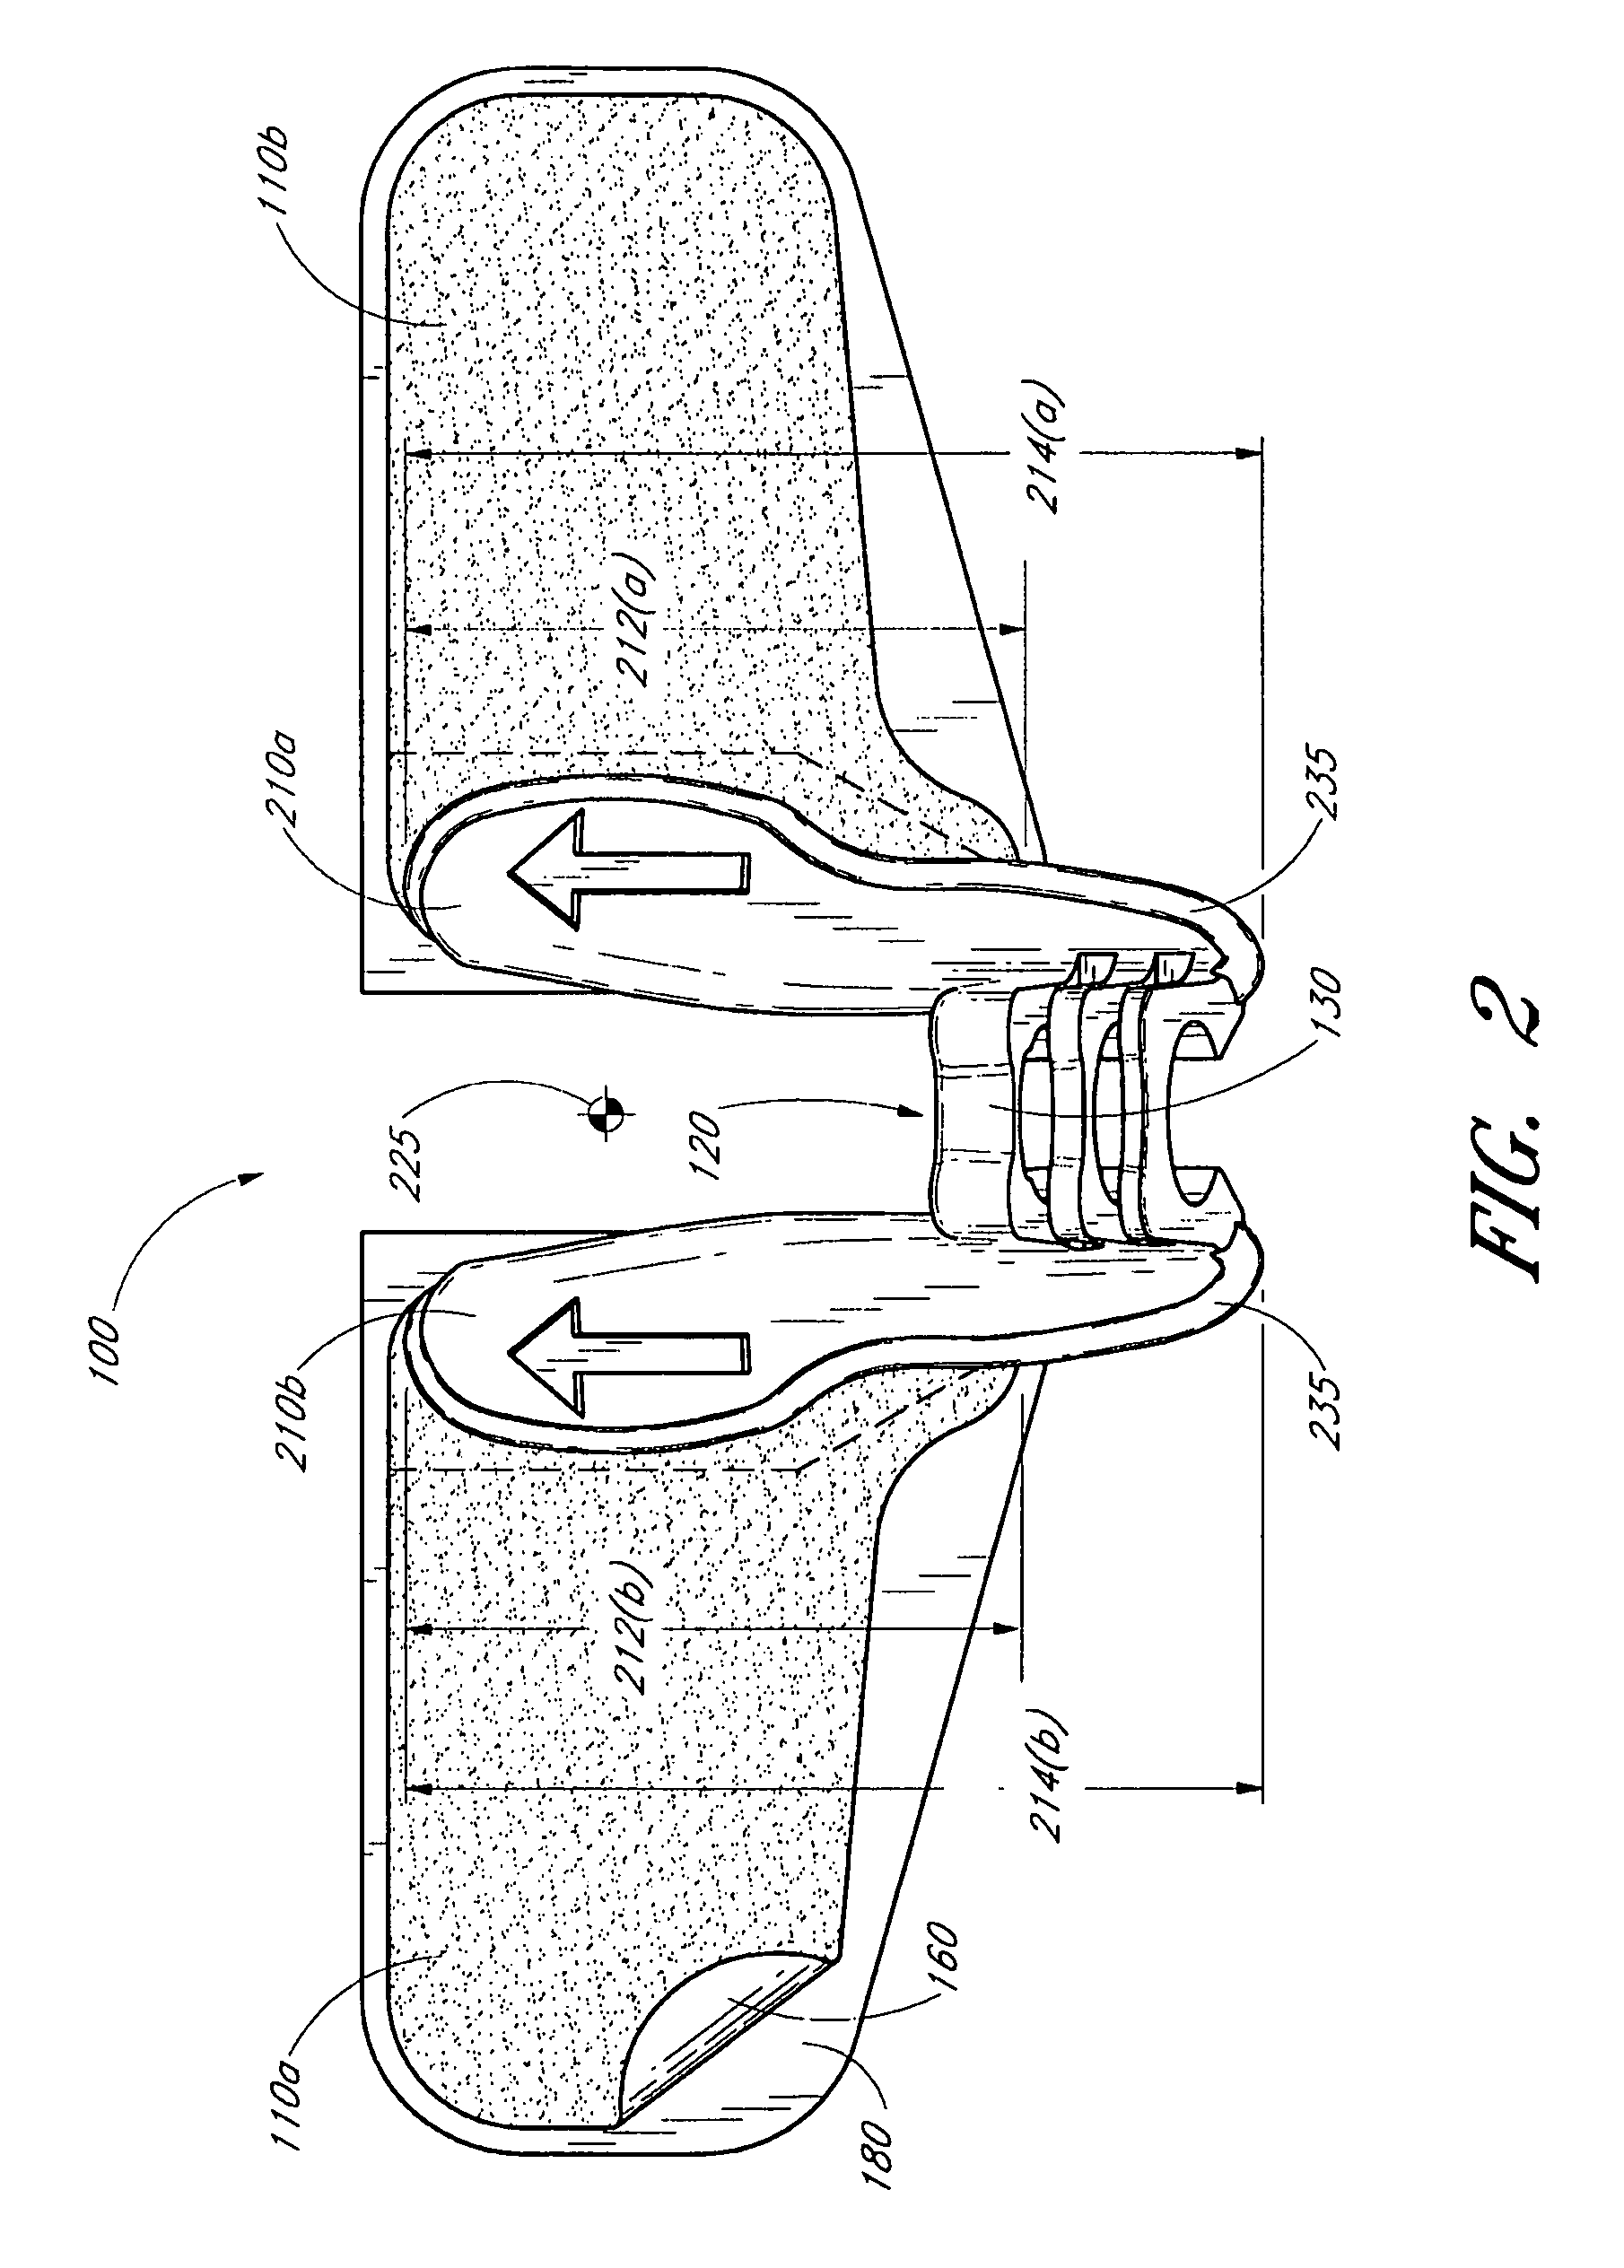 Anchoring system for use with neonates